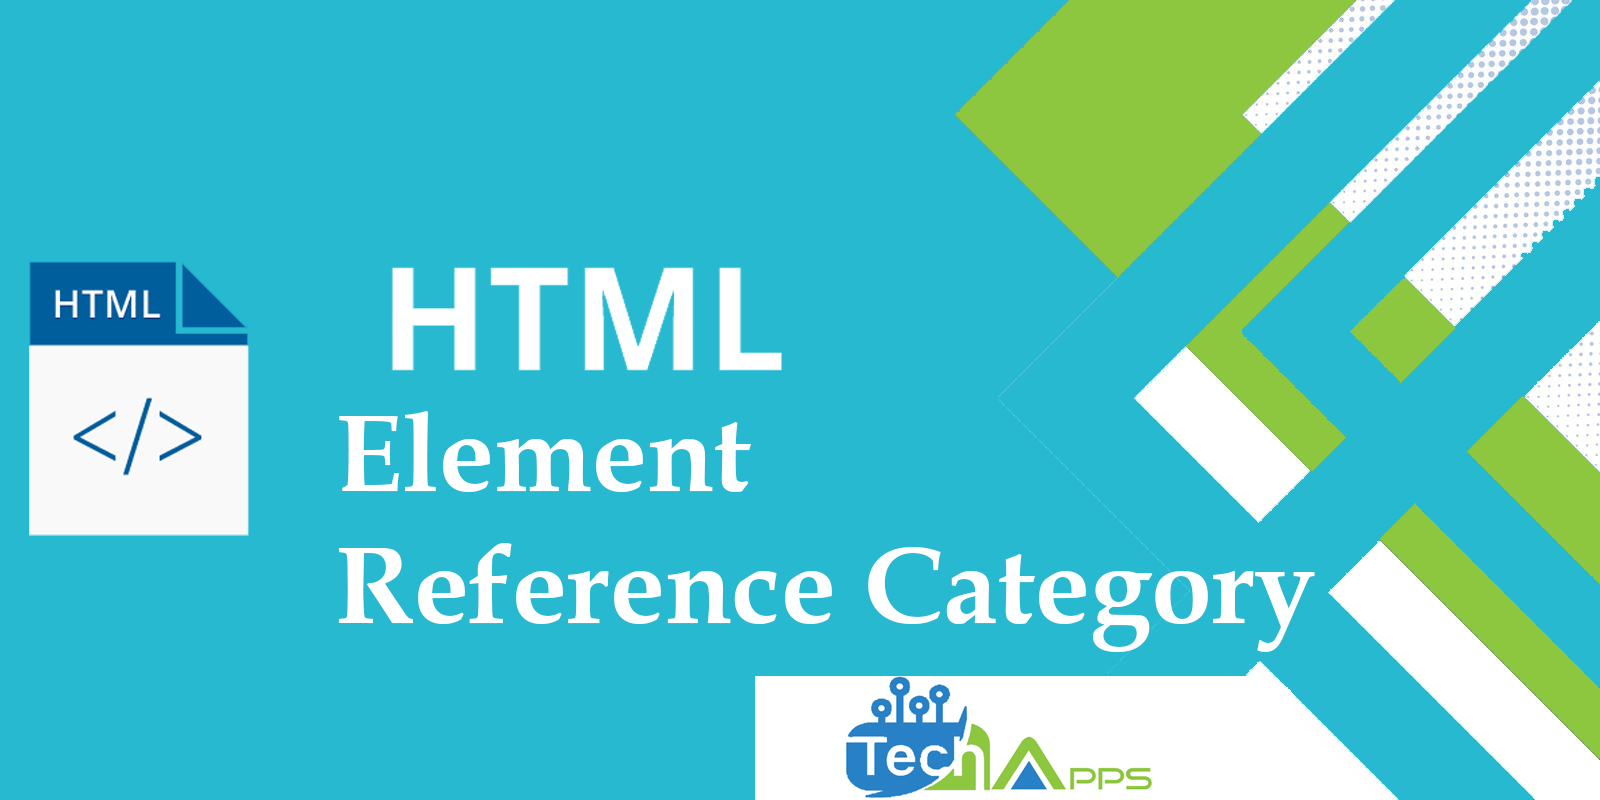 HTML Element Reference Category